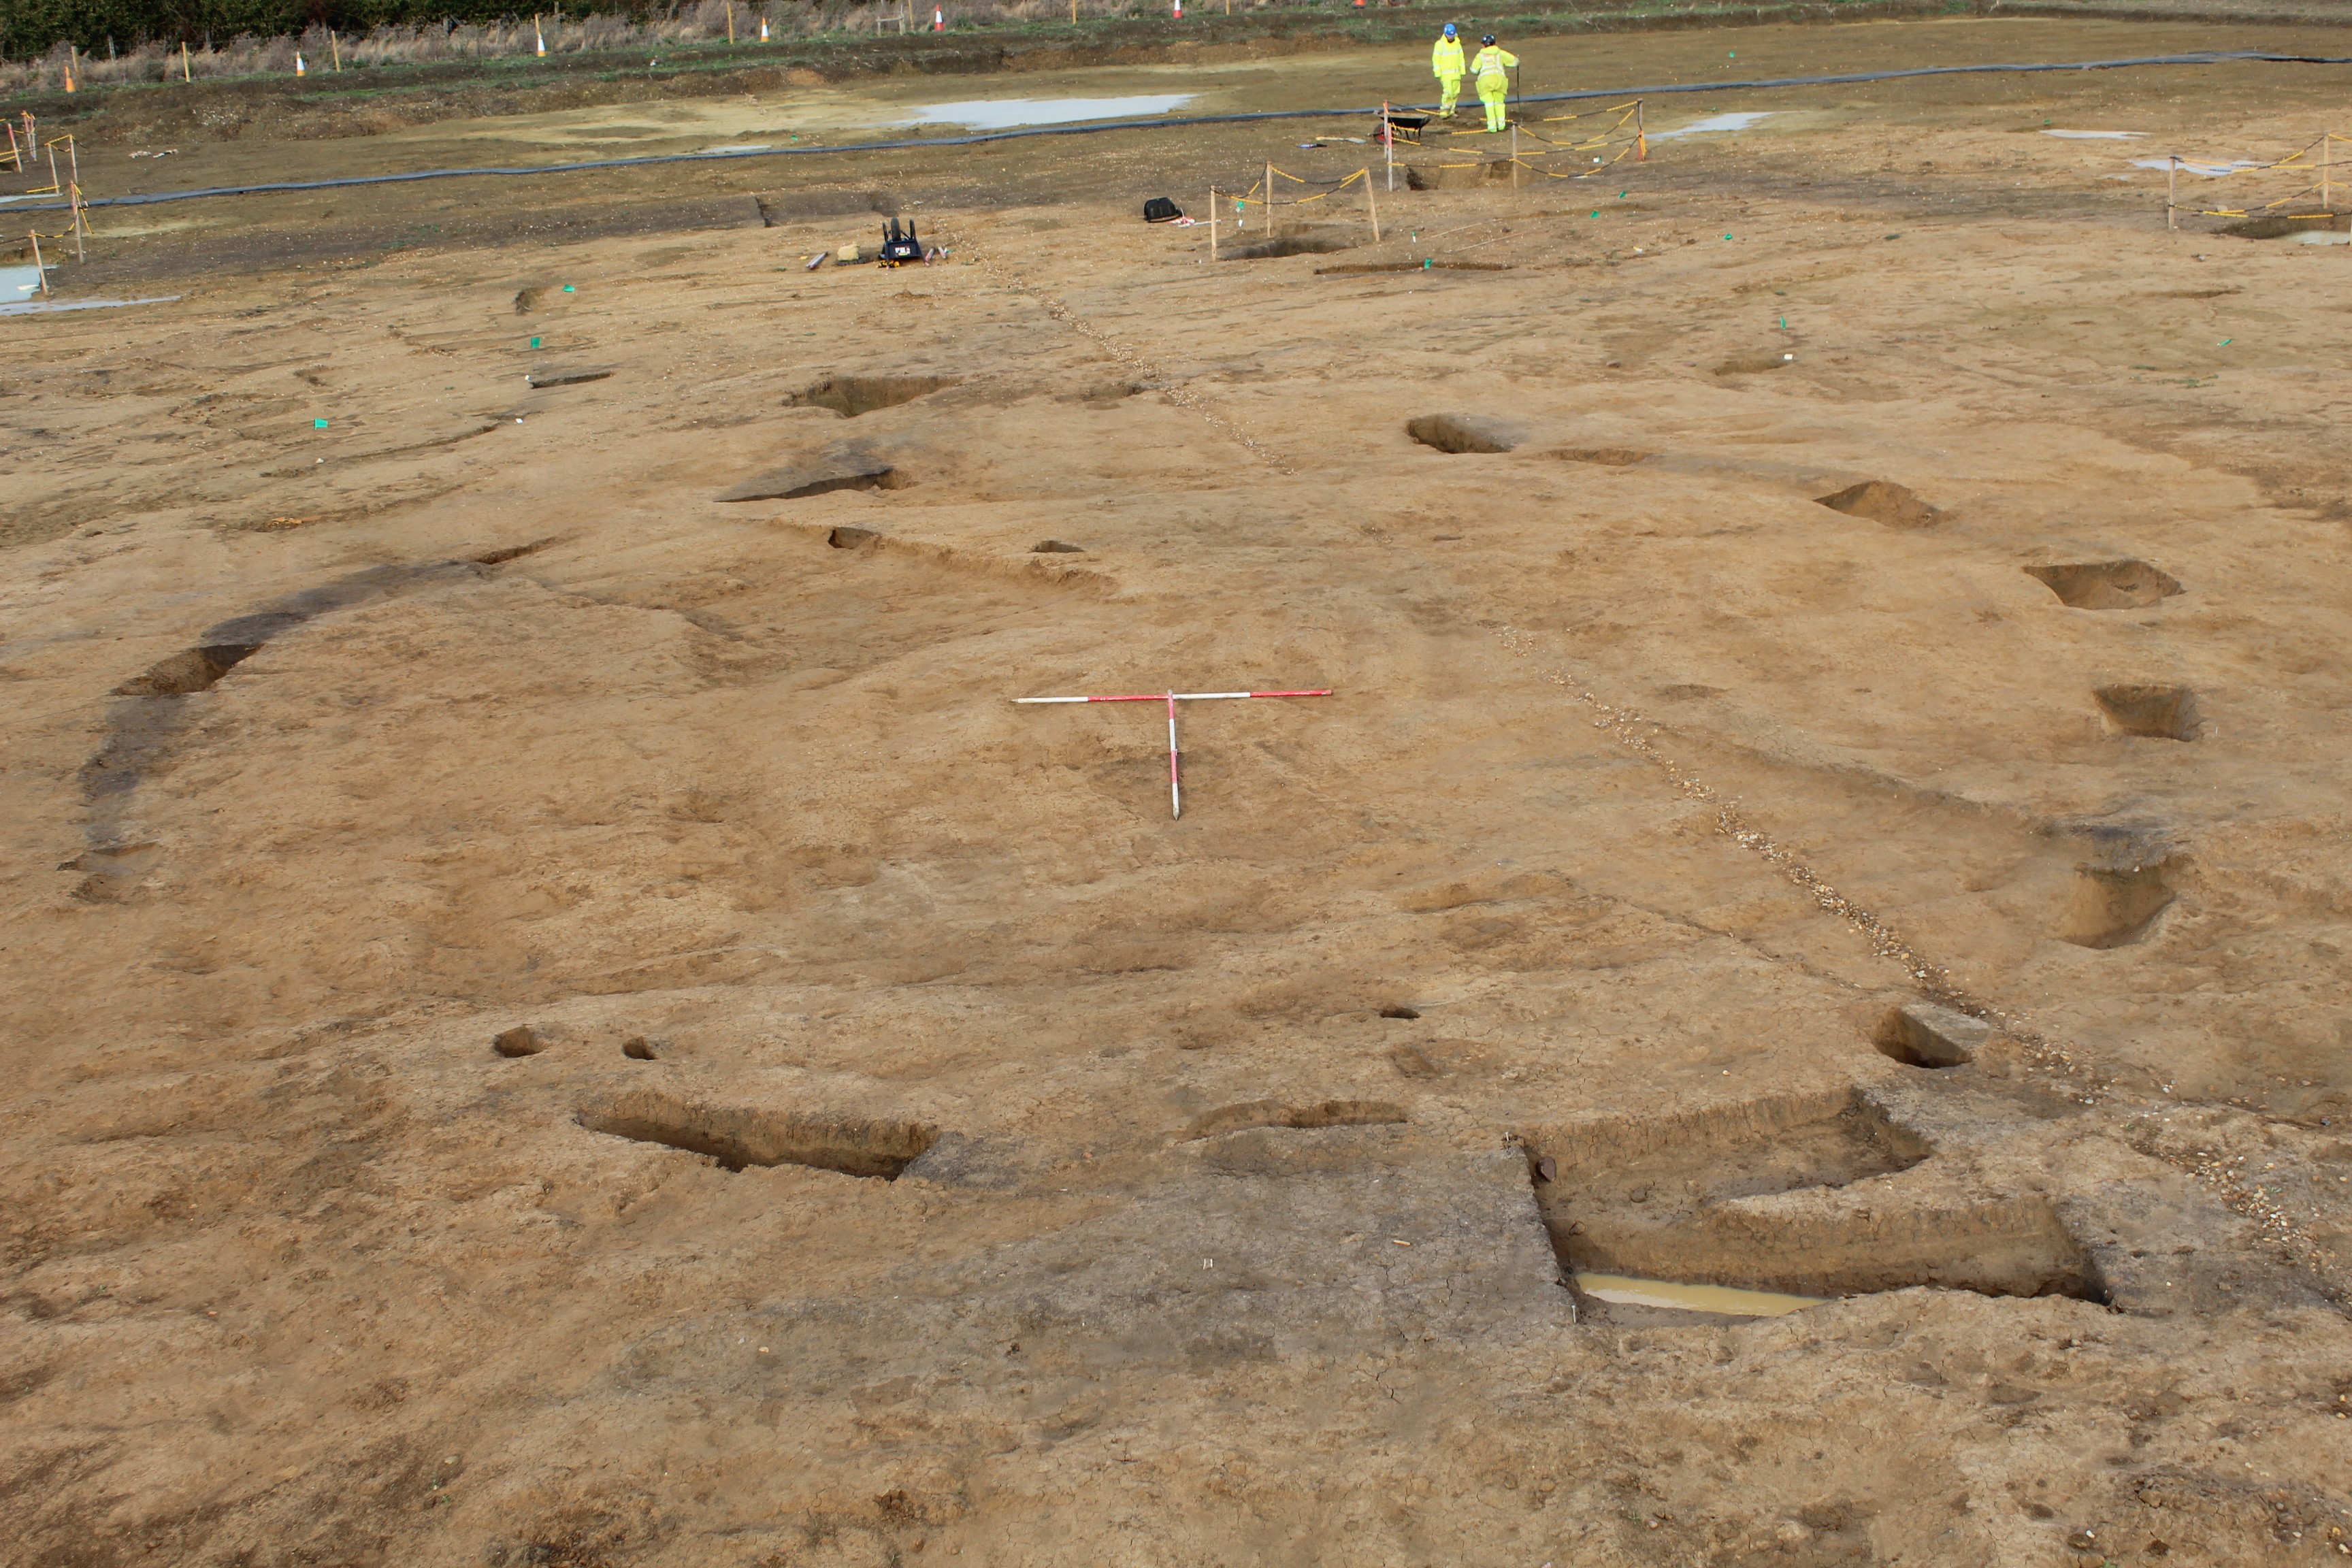 The northern roundhouse, one of two found on the site near Tempsford in Bedfordshire